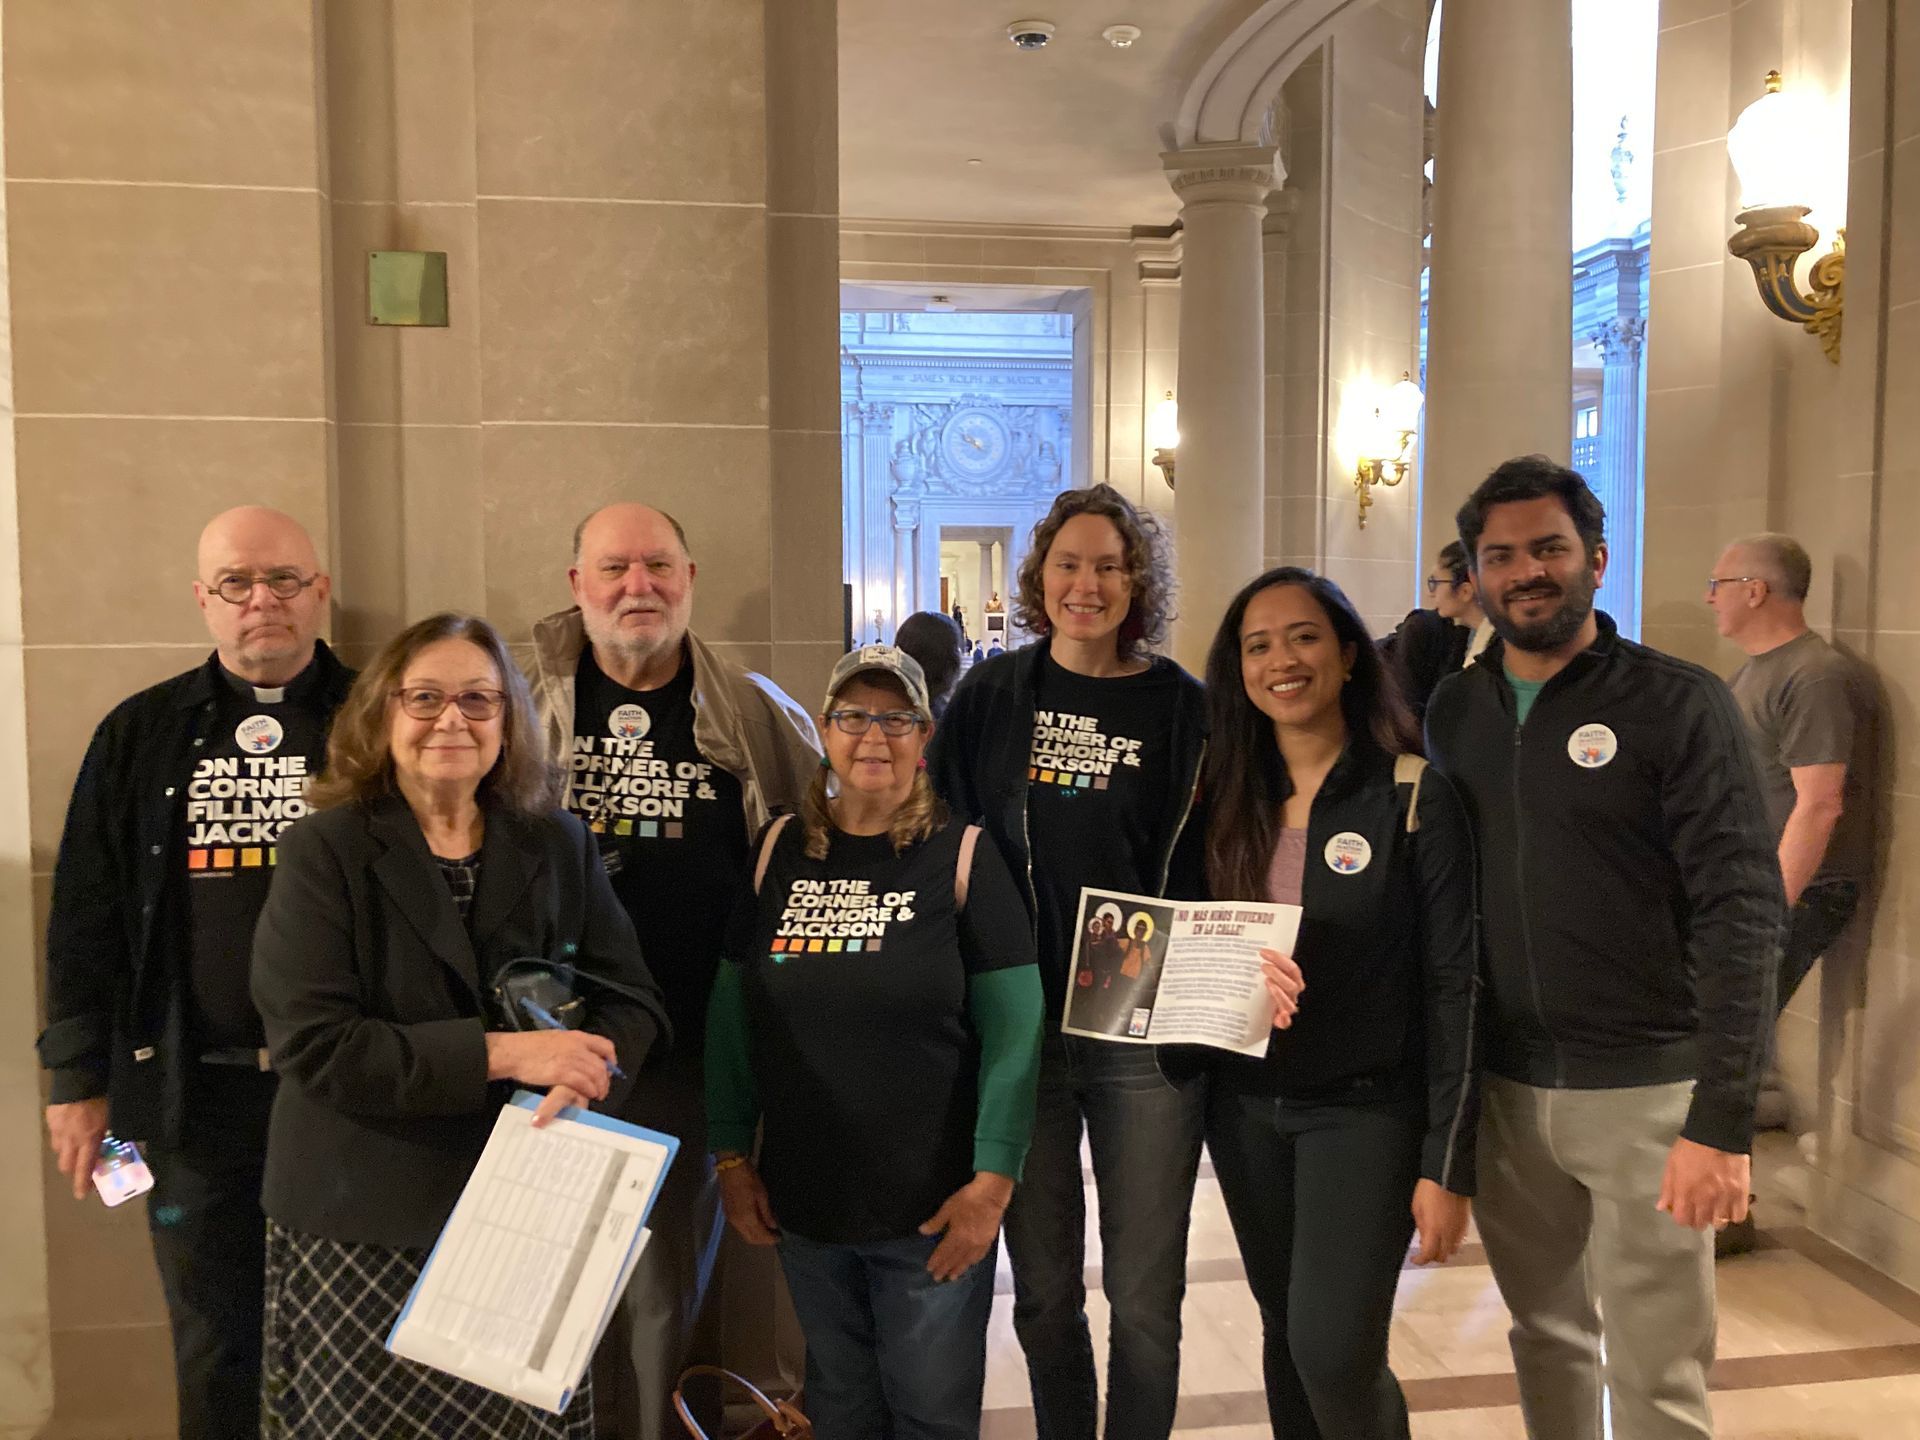 A group of Calvary goers posing for a photo in the hallway of City Hall. Rev. Victor Floyd, Dave, Lupy,  Jane, Alison, Susan, Satyan holding up Faith in Action Bay Area materials about ending child homelessness.